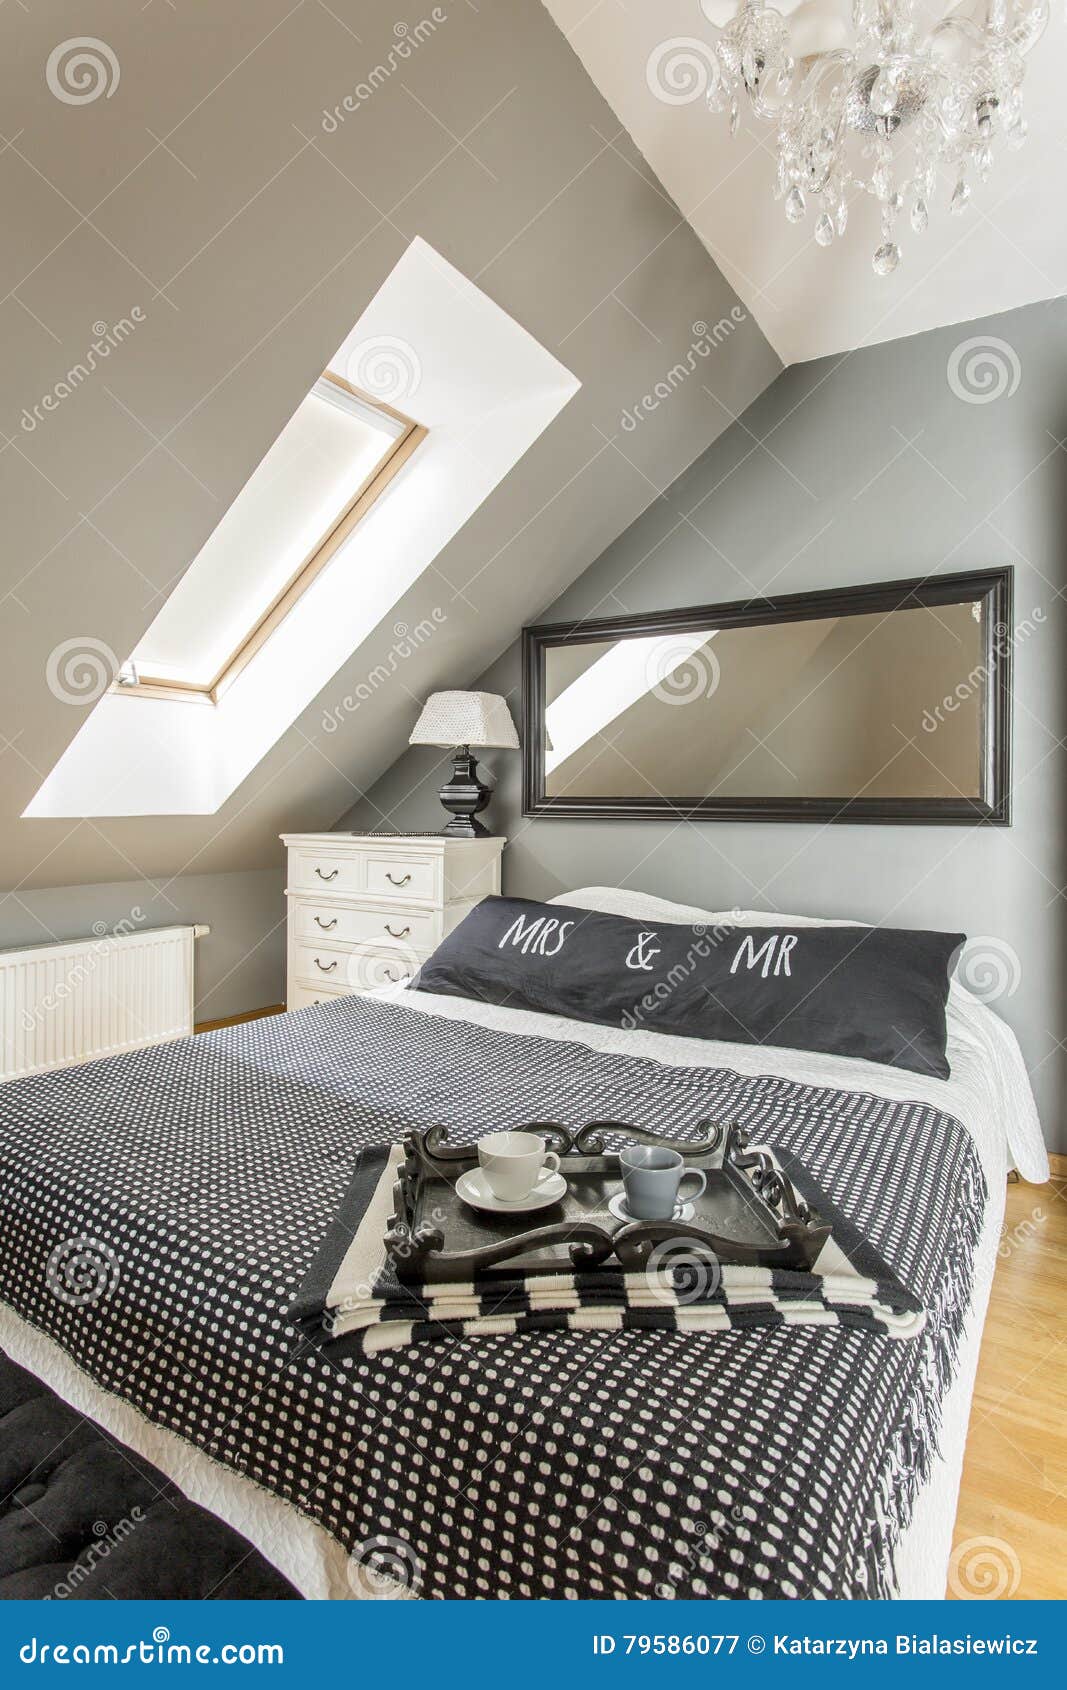 bedroom interior with a marital bed